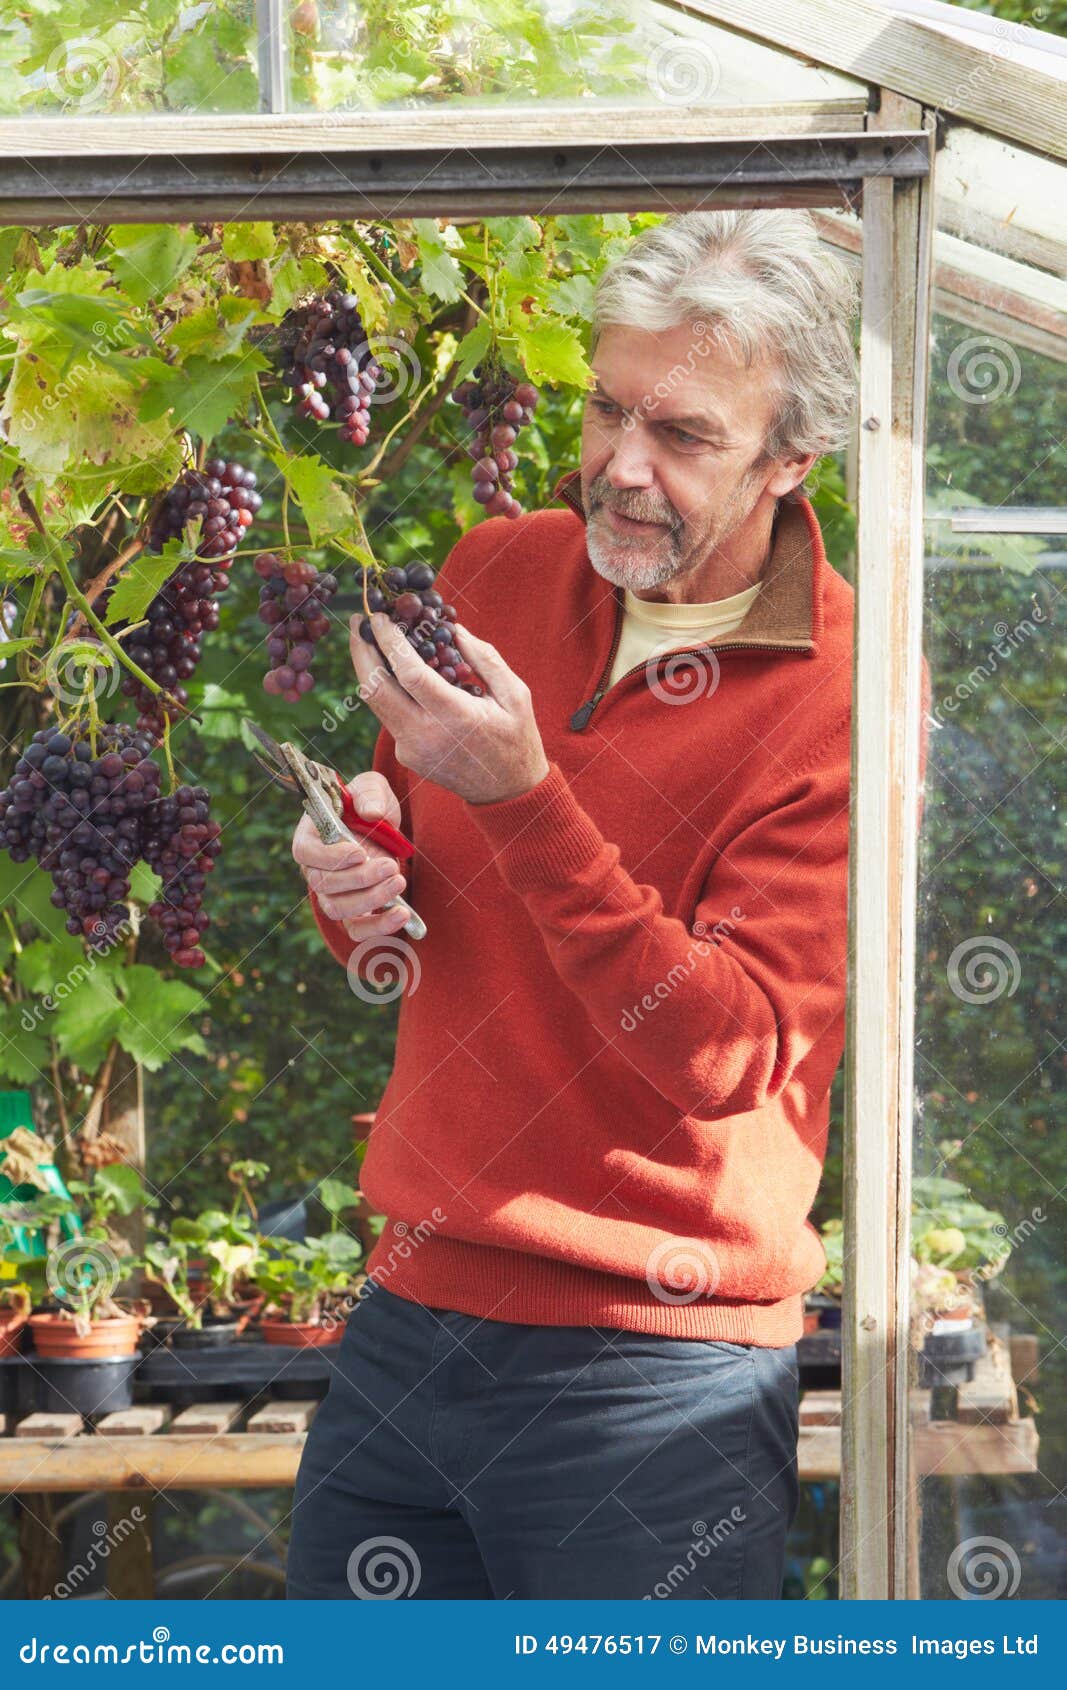 mature man cultivating grapes in greenhouse